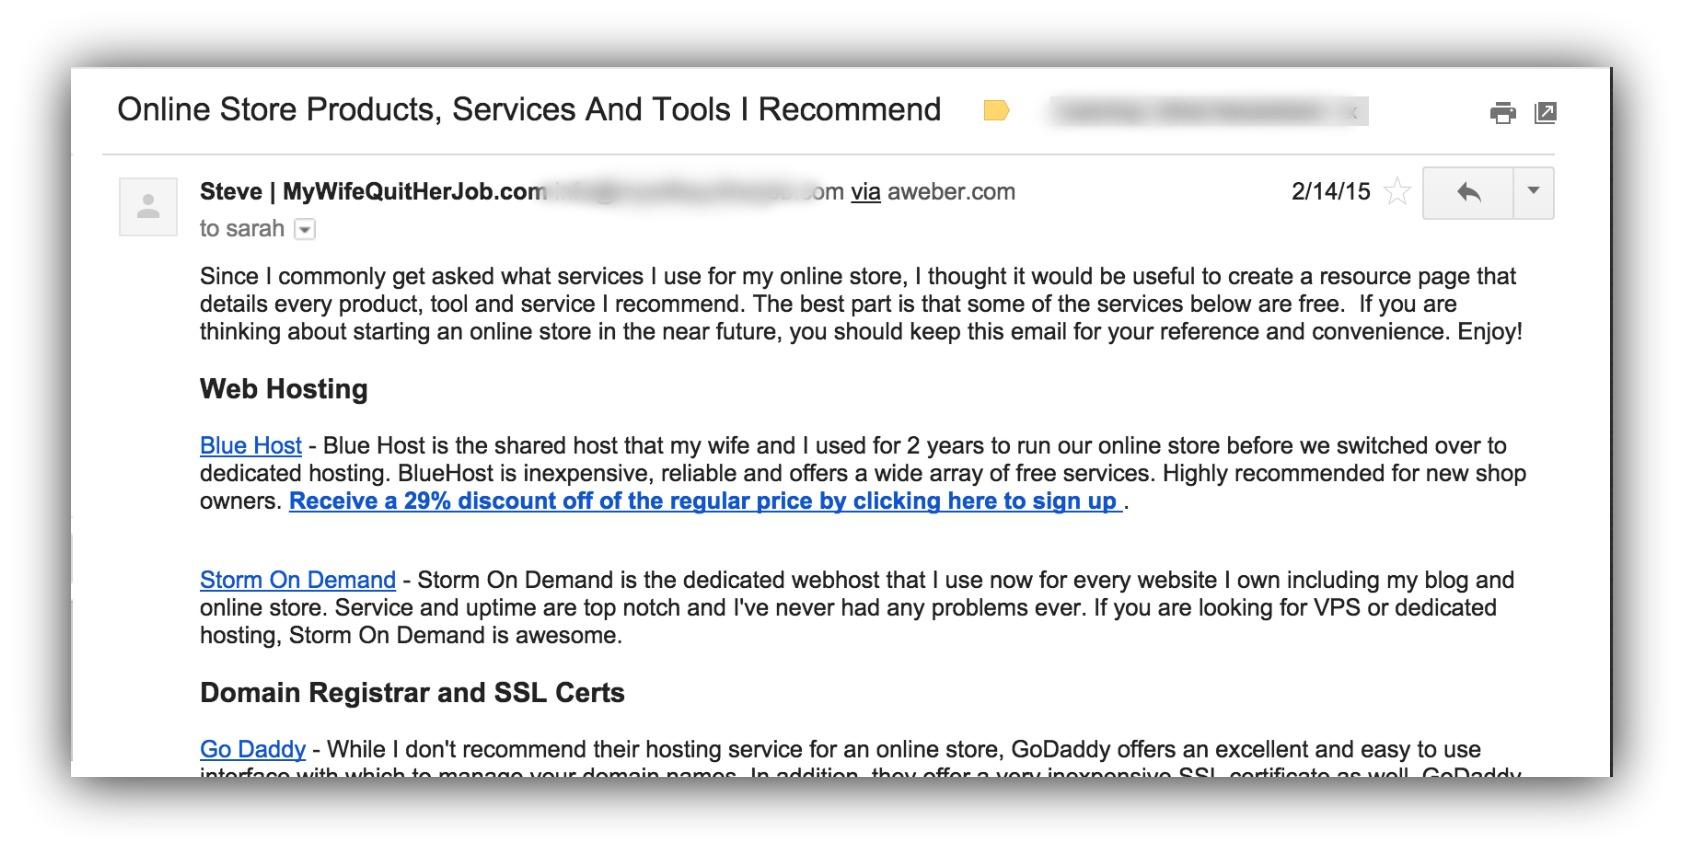 Screenshot of an email sent by Steve of mywifequitherjob.com